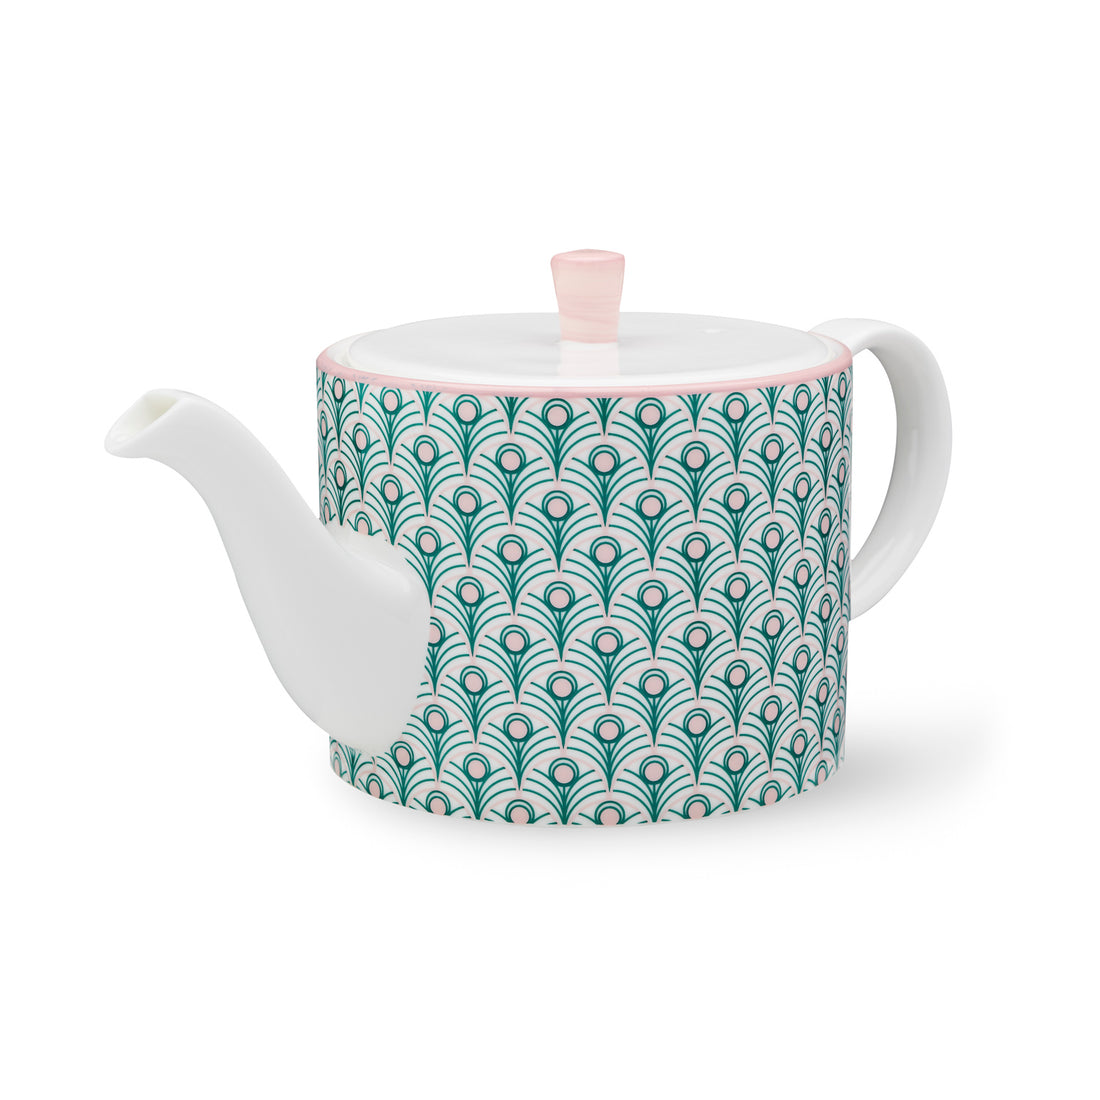 Peacock Teapot in Teal and Blush - 450ml